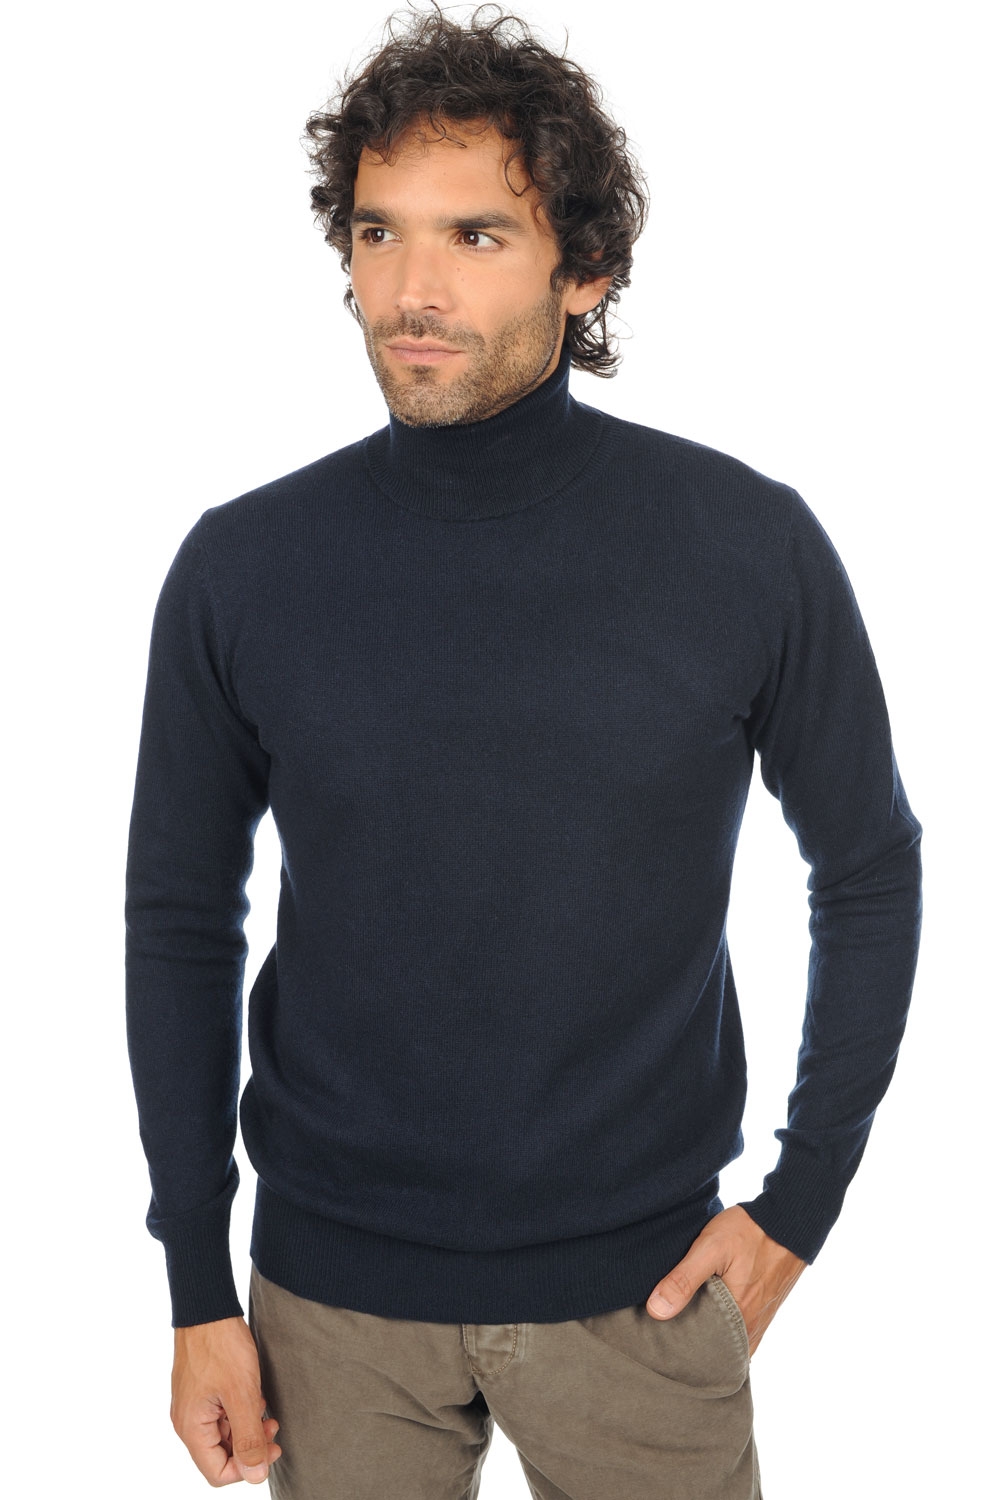 Cashmere men basic sweaters at low prices tarry first dress blue s